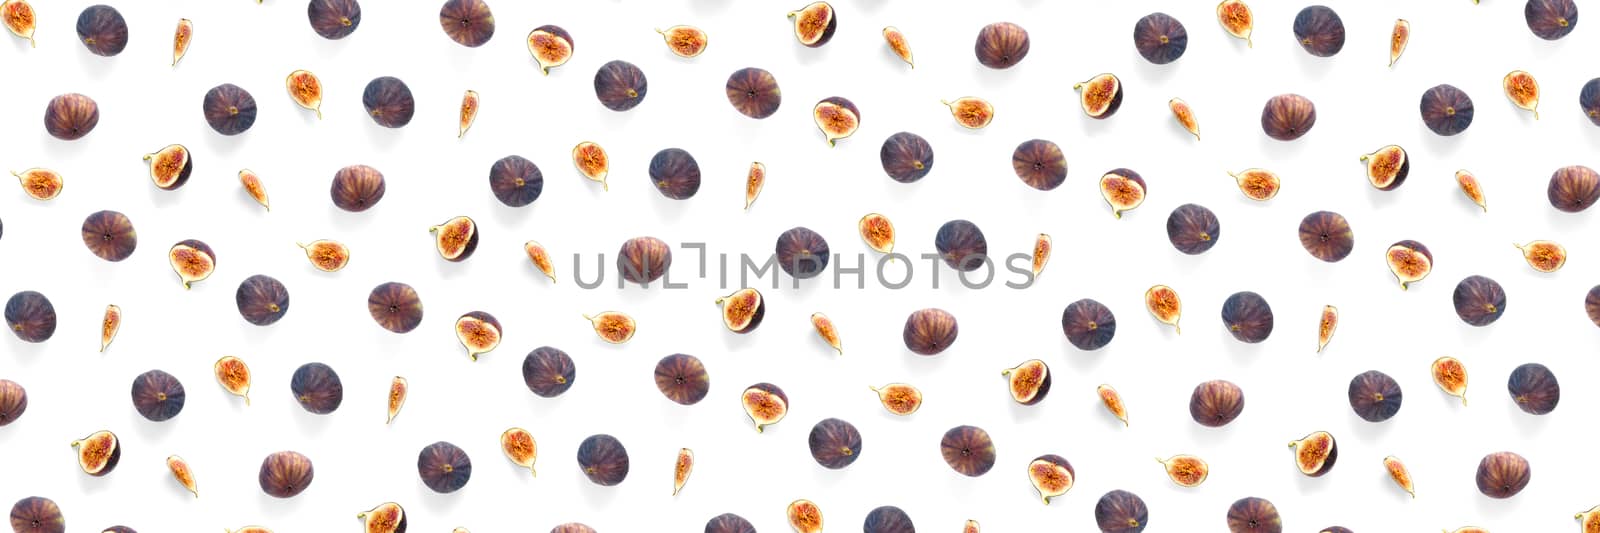 Background from Fresh figs. Food Photo. Modern fig fruits background. Creative set of the whole and sliced figs on a white background, not pattern